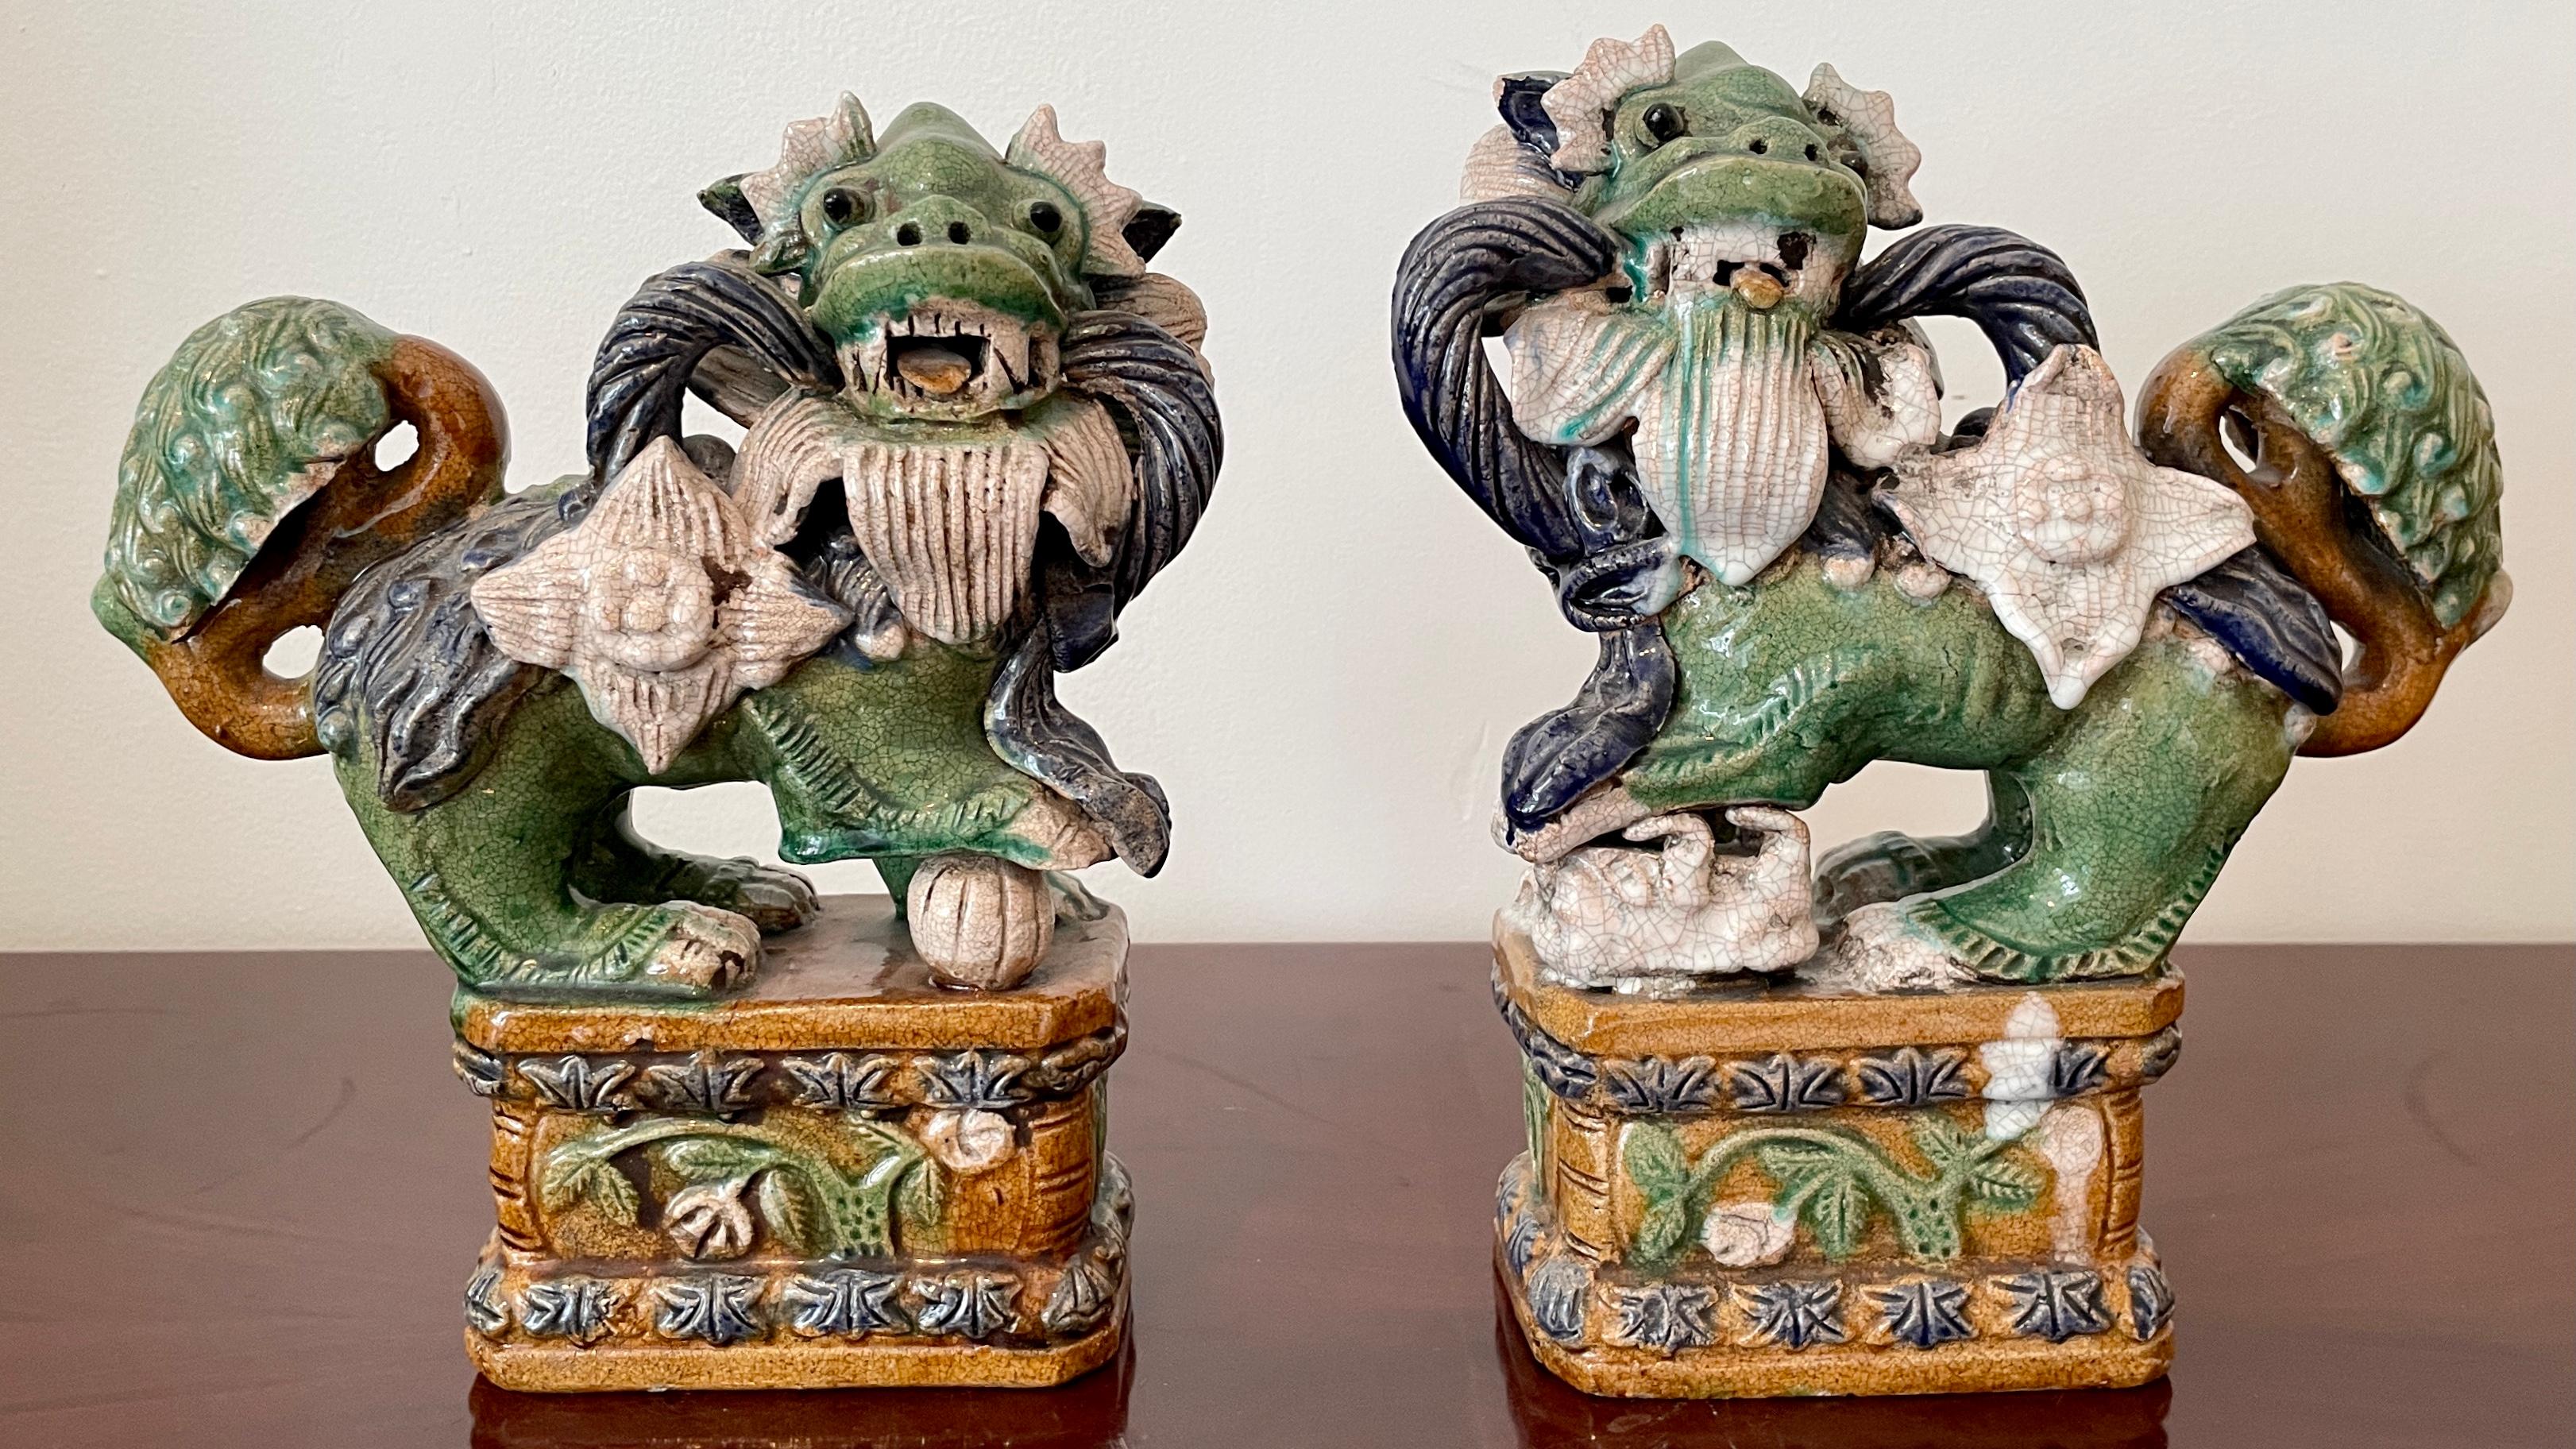 Gorgeous pair of glazed terra cotta male and female Foo Dogs standing on a base. Great addition to your Asian and classic inspired interior table tops.